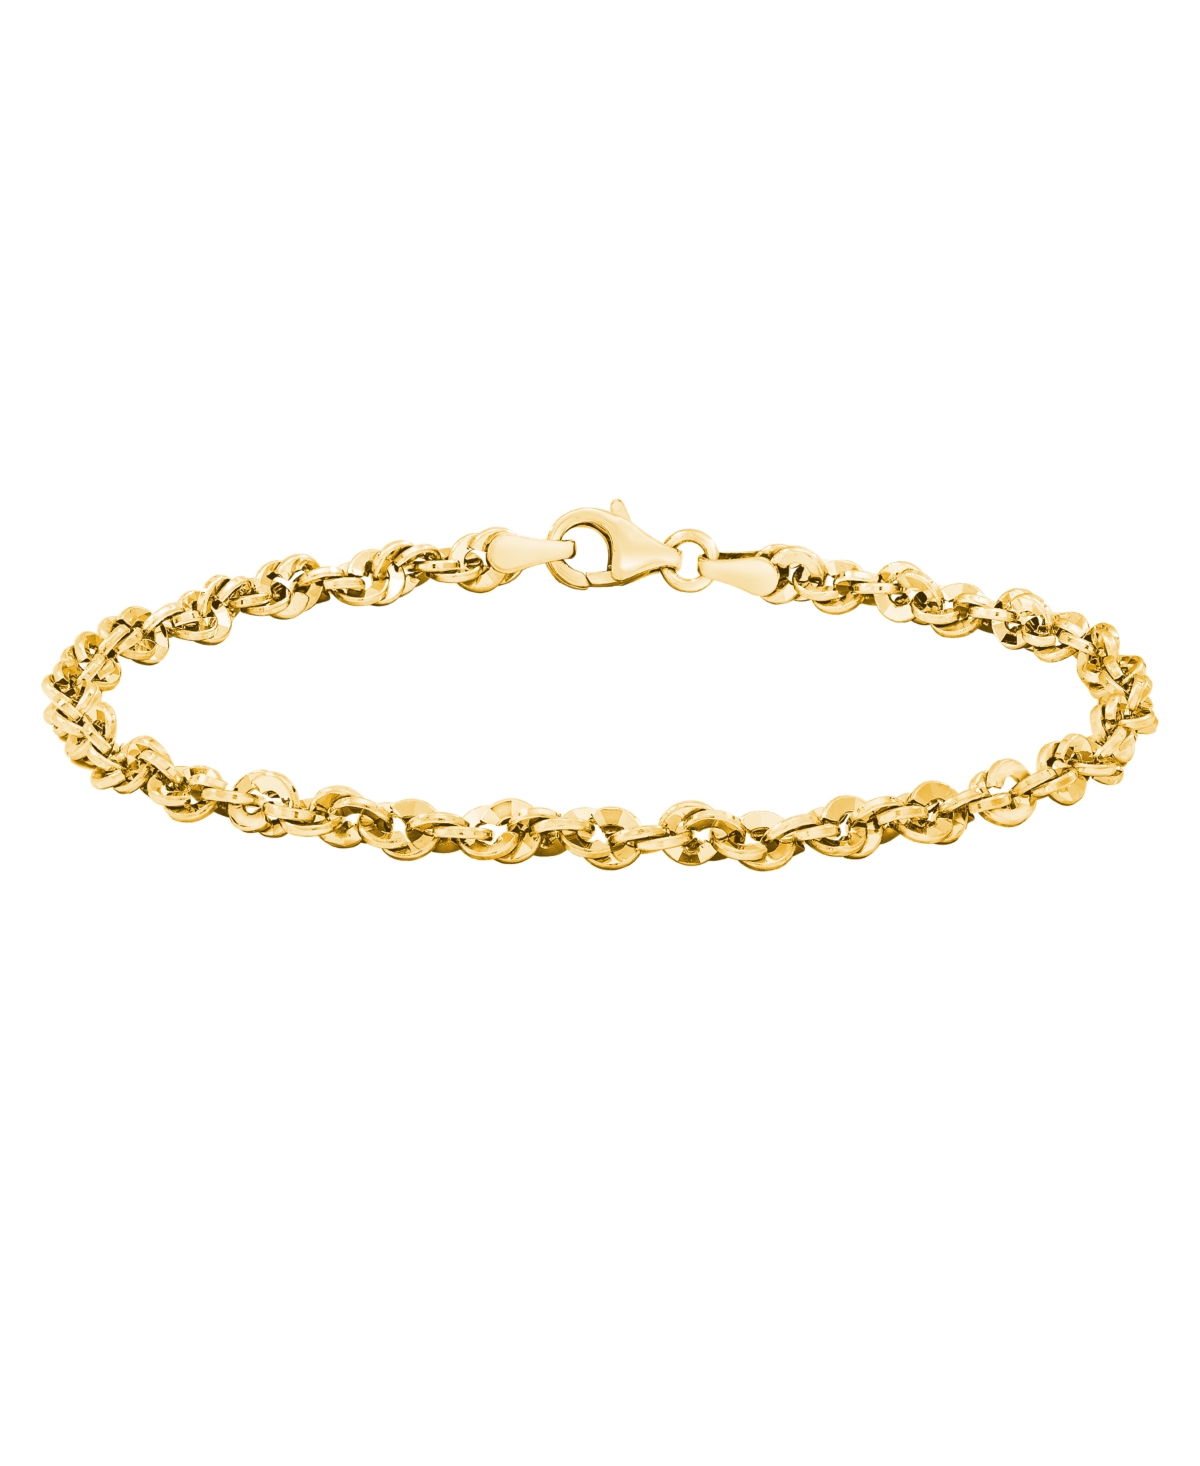 Diamond Cut Rope, 7-1/2" Chain Bracelet (3-3/4mm) in 14k Gold, Made in Italy - Yellow Gold